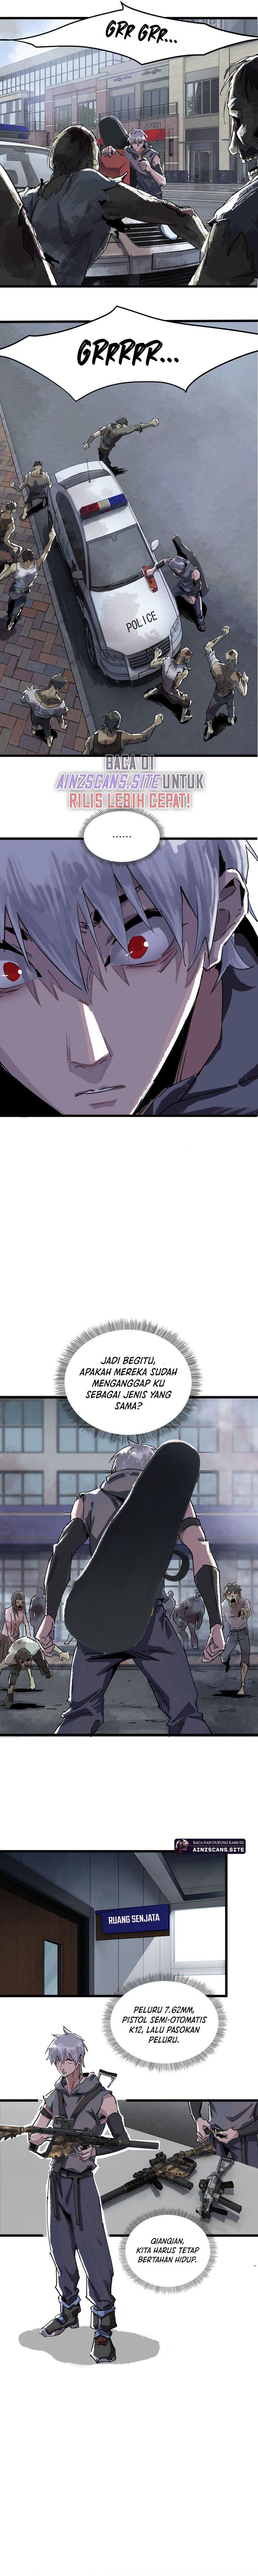 The King of Zombie Chapter 03